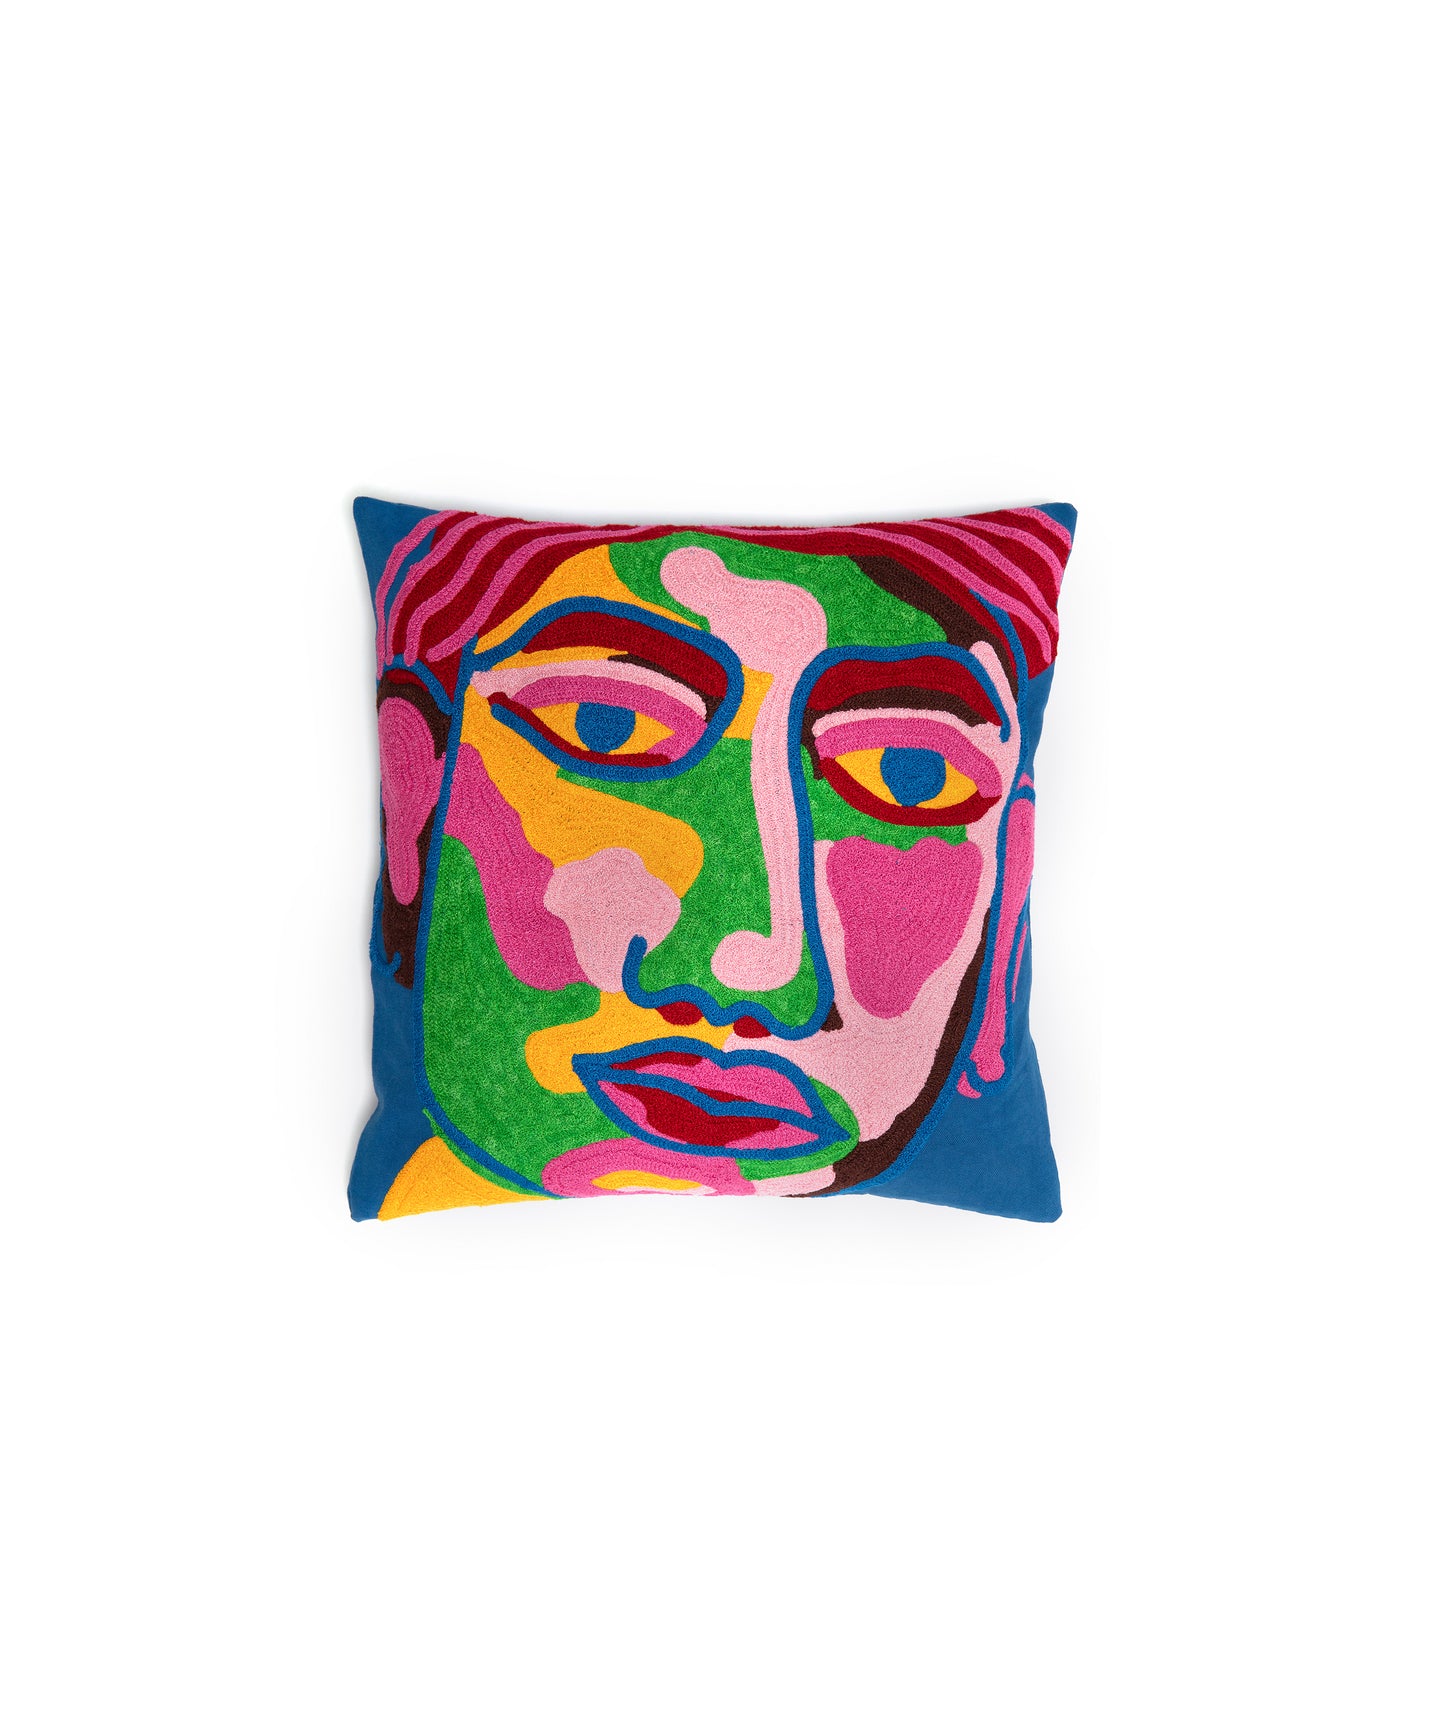 Image of the Portrait Pillow Cover with an abstract portrait made of blue, green, pink, red, and yellow. This pillow cover is 100% cotton and measures 18 inches square.